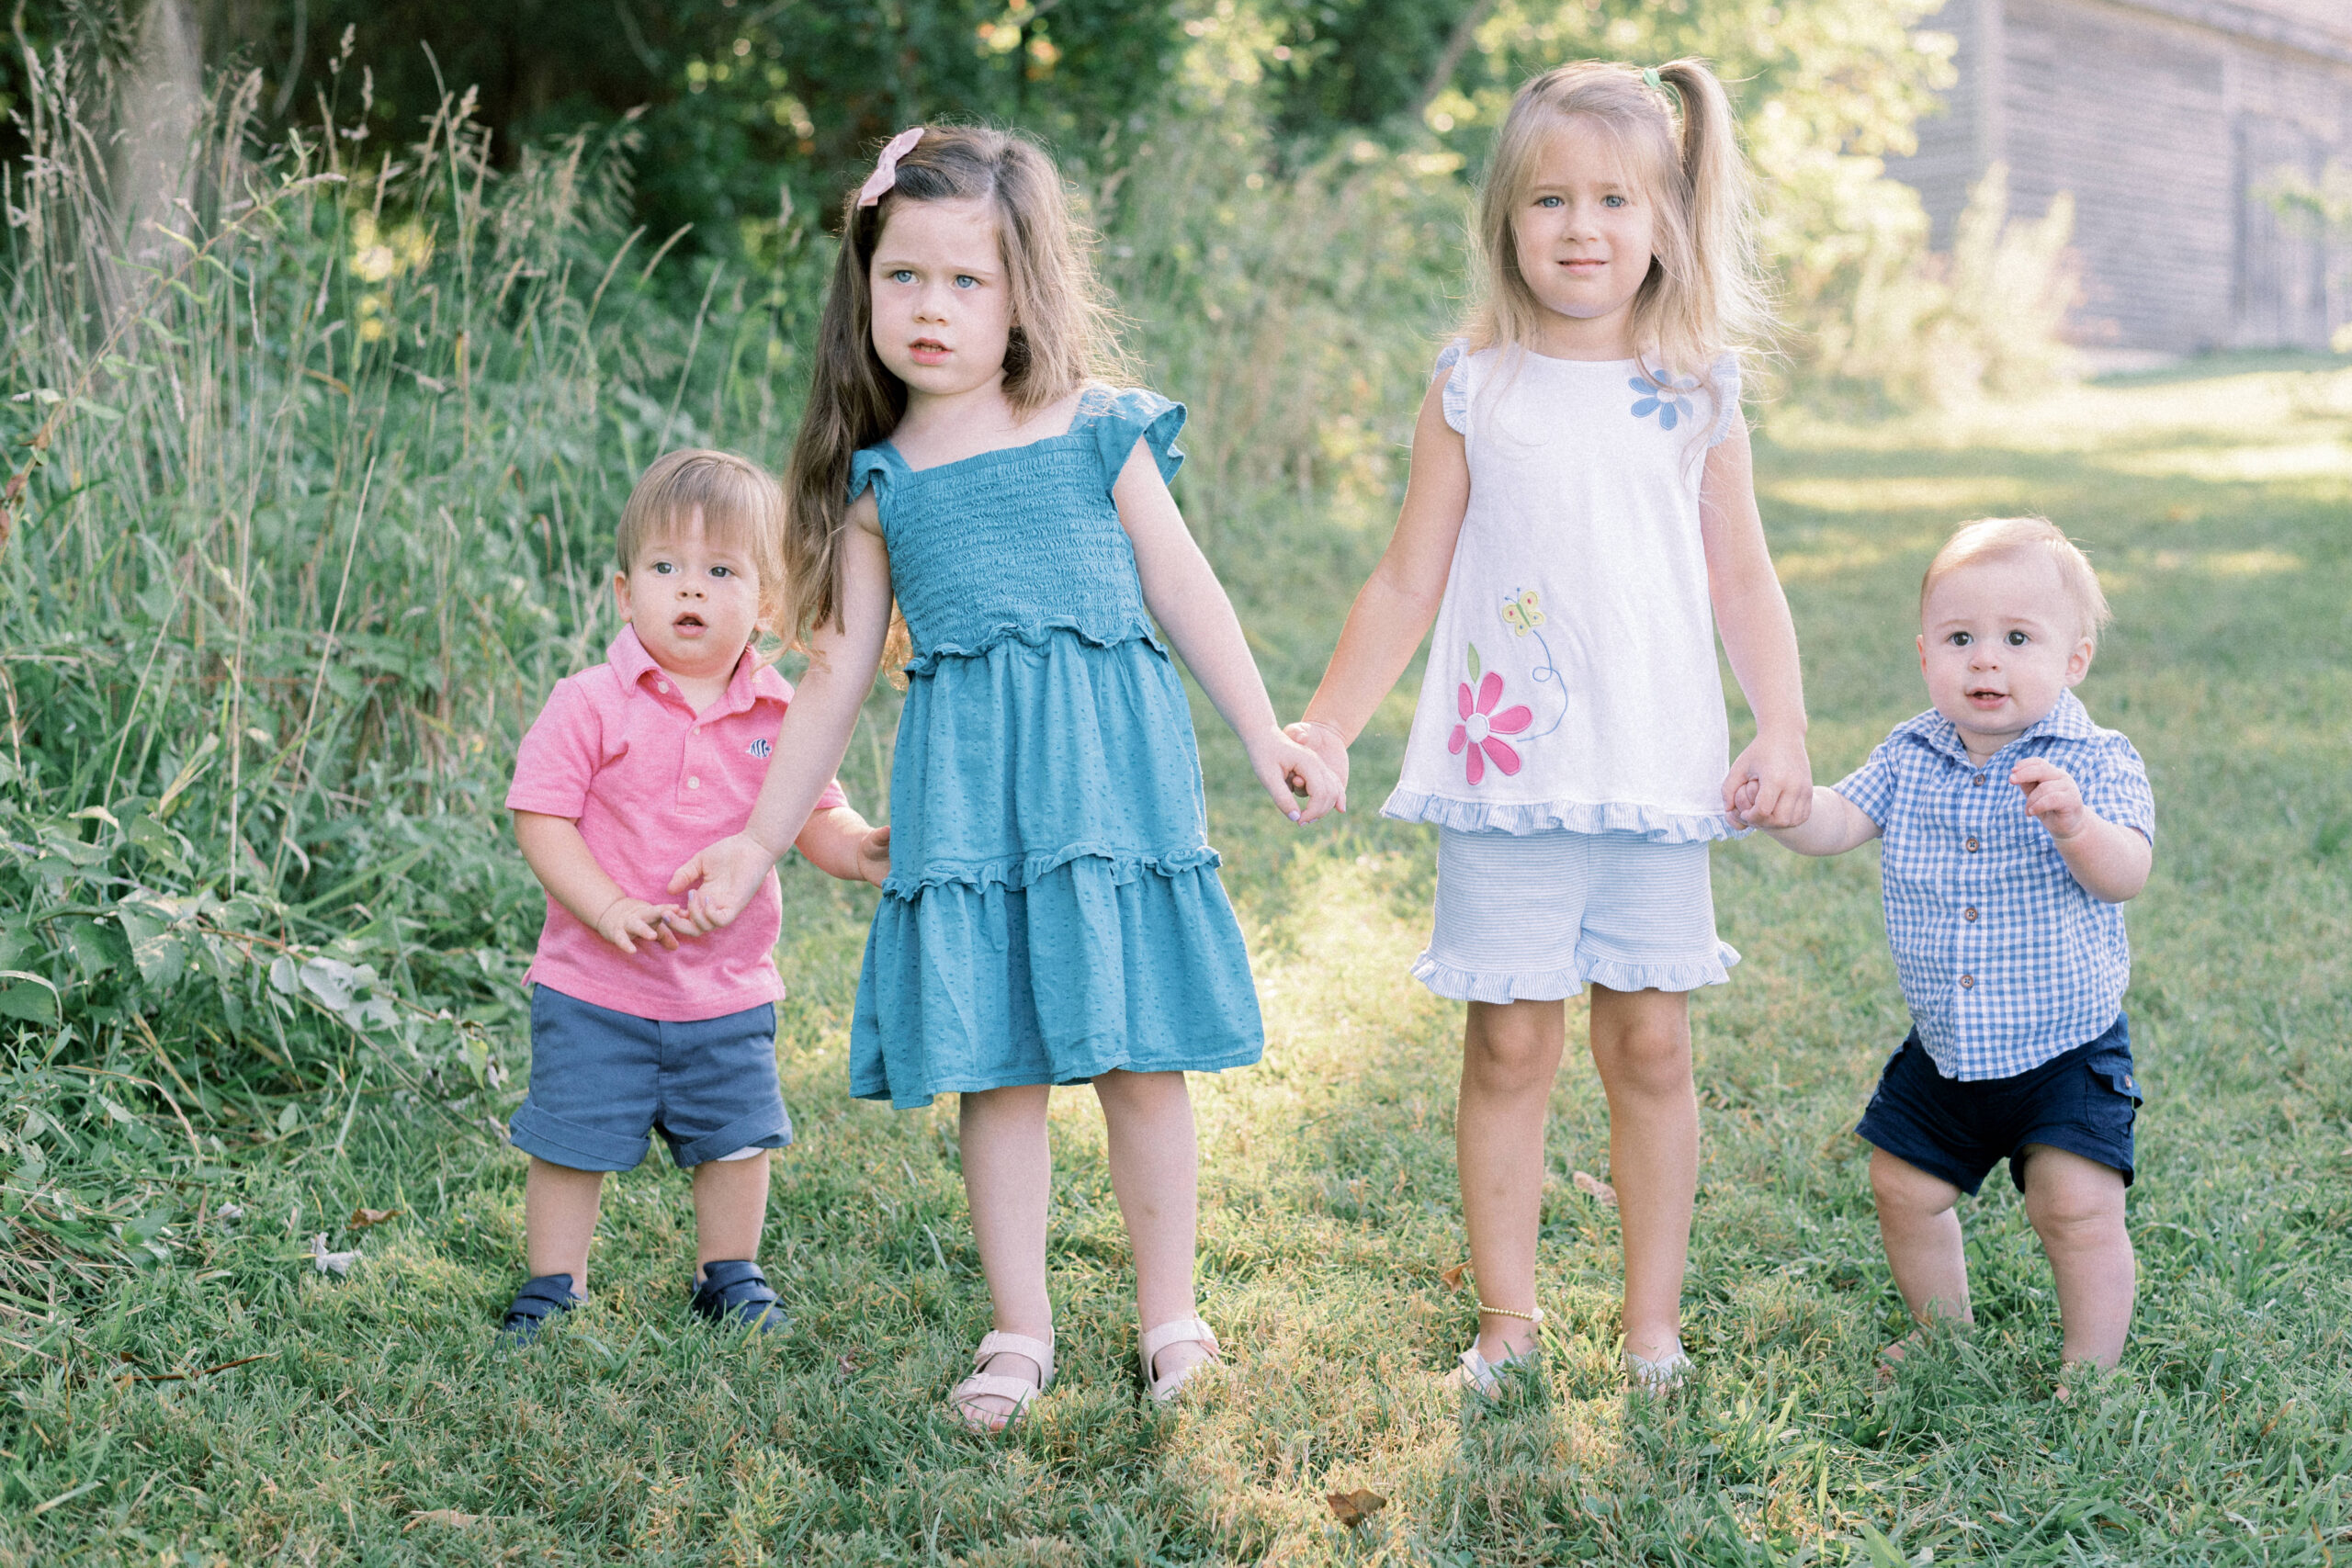 Maryland photographer captures children walking and holding hands